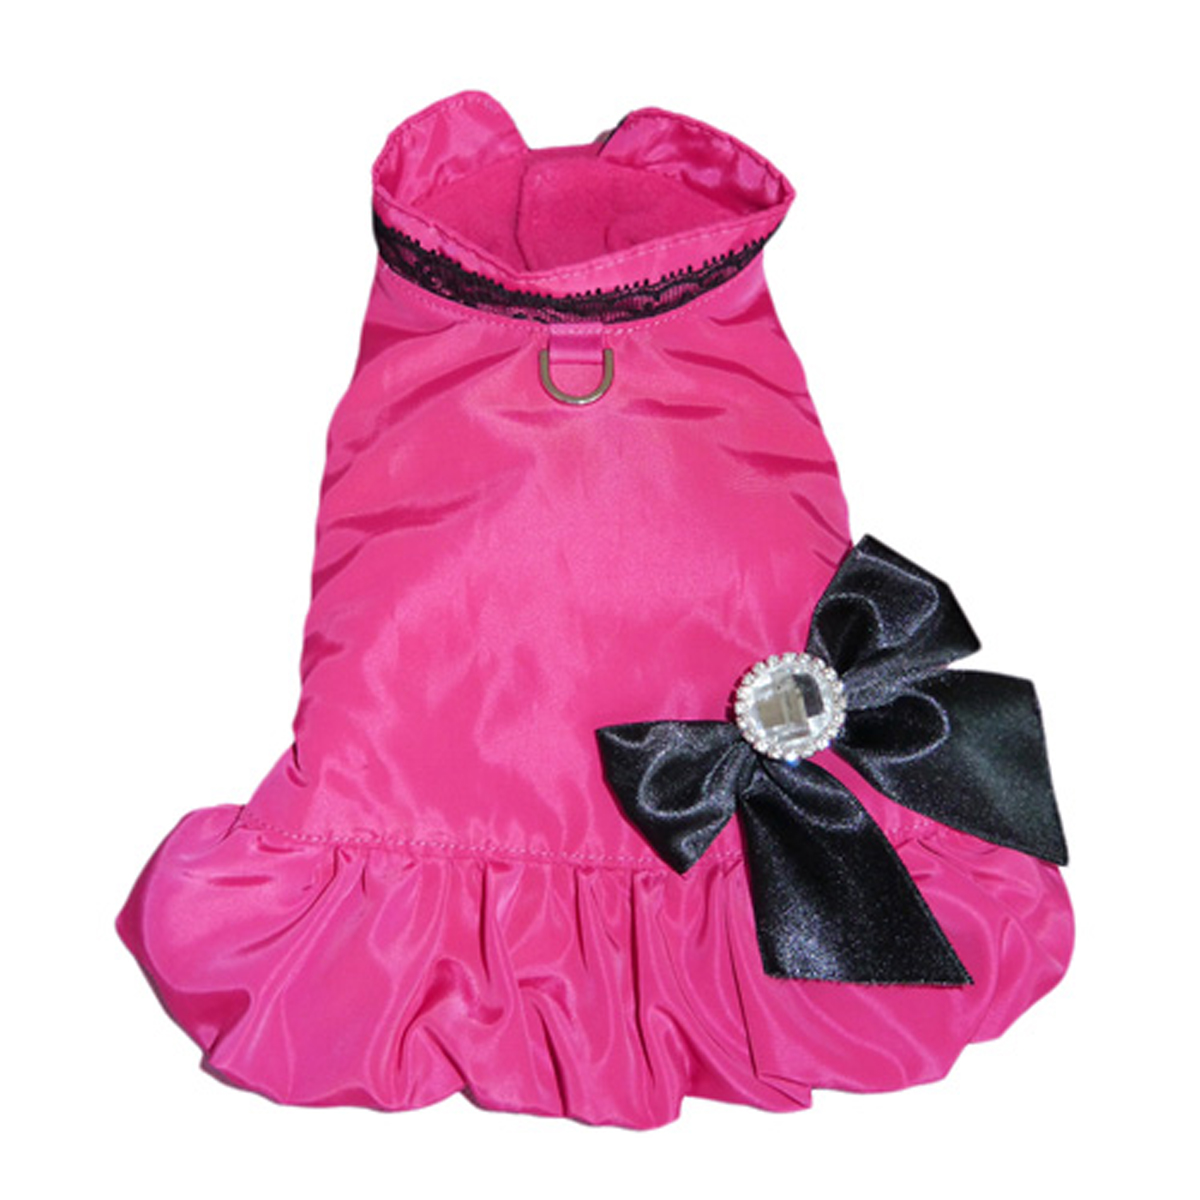 Pooch Outfitters Ava City Dog Coat - Hot Pink